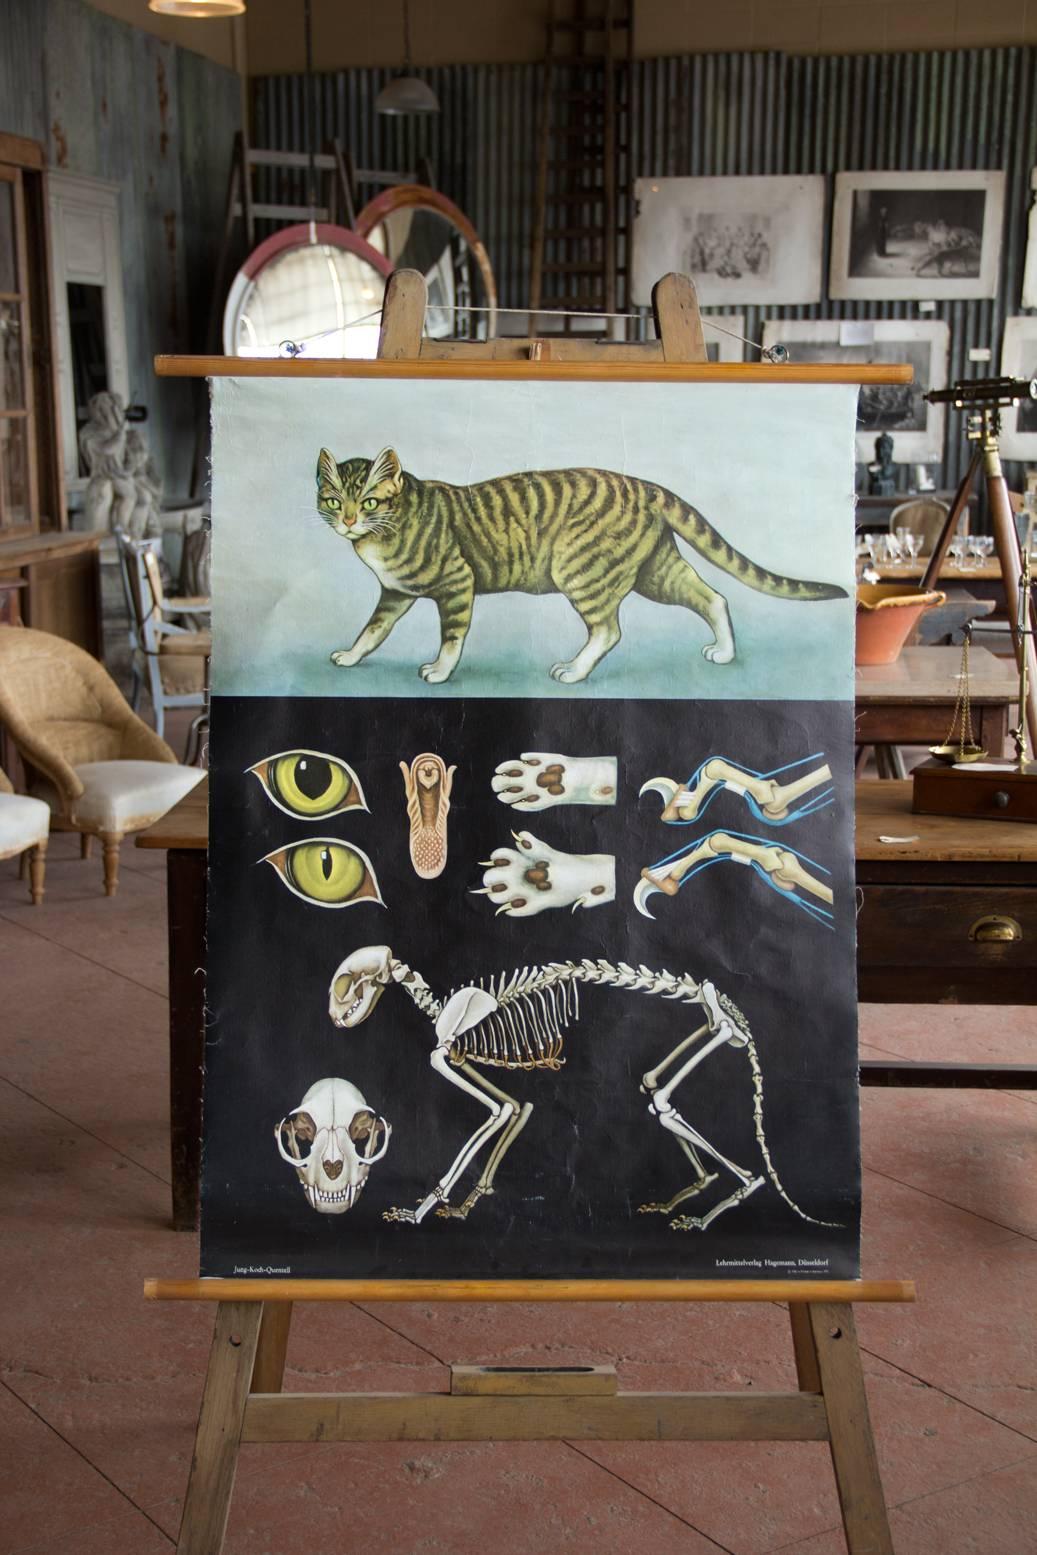 Vintage German educational school wall chart of an anatomical cat showing, eyes, tongue, paws and skeleton. This is printed on canvas by Jung-Koch Quentell, of Dusseldorf who were the most respected of educational chart makers.